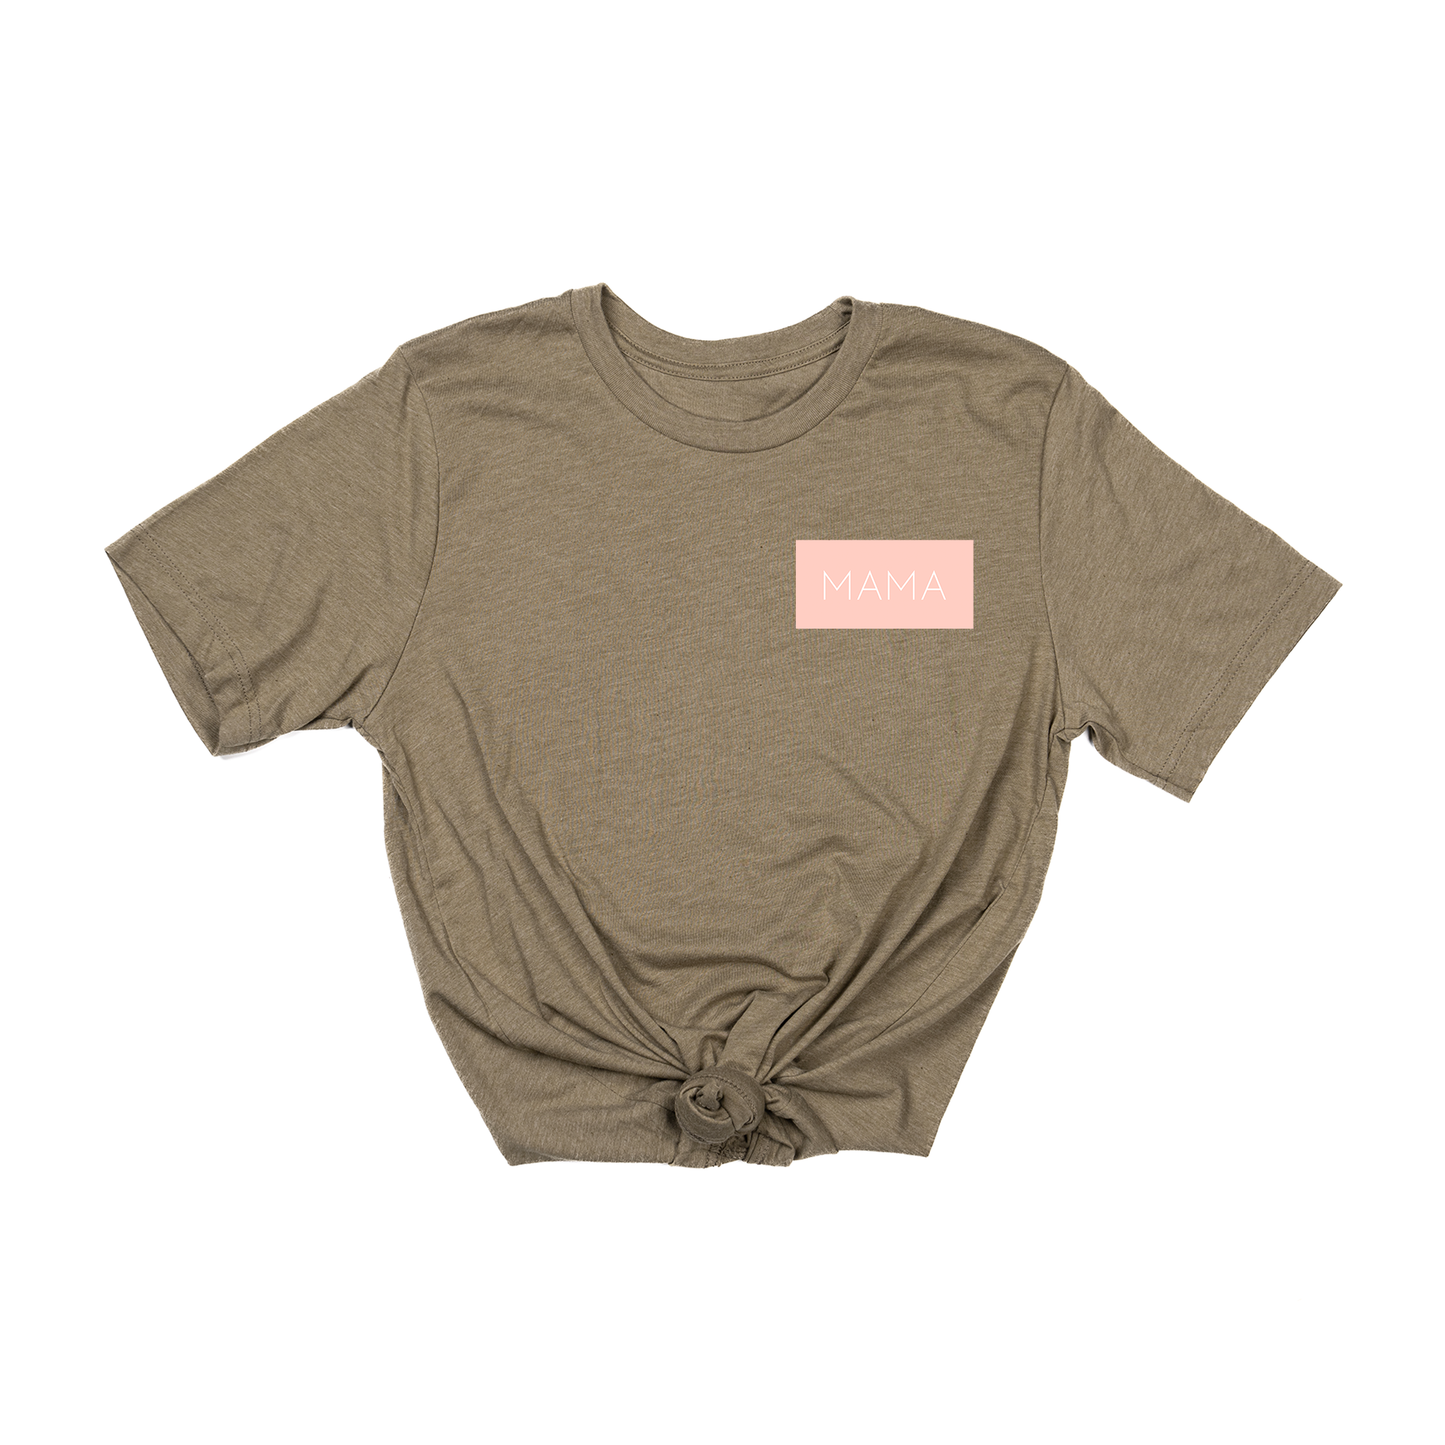 Mama (Boxed Collection, Pocket, Ballerina Pink Box/White Text) - Tee (Olive)